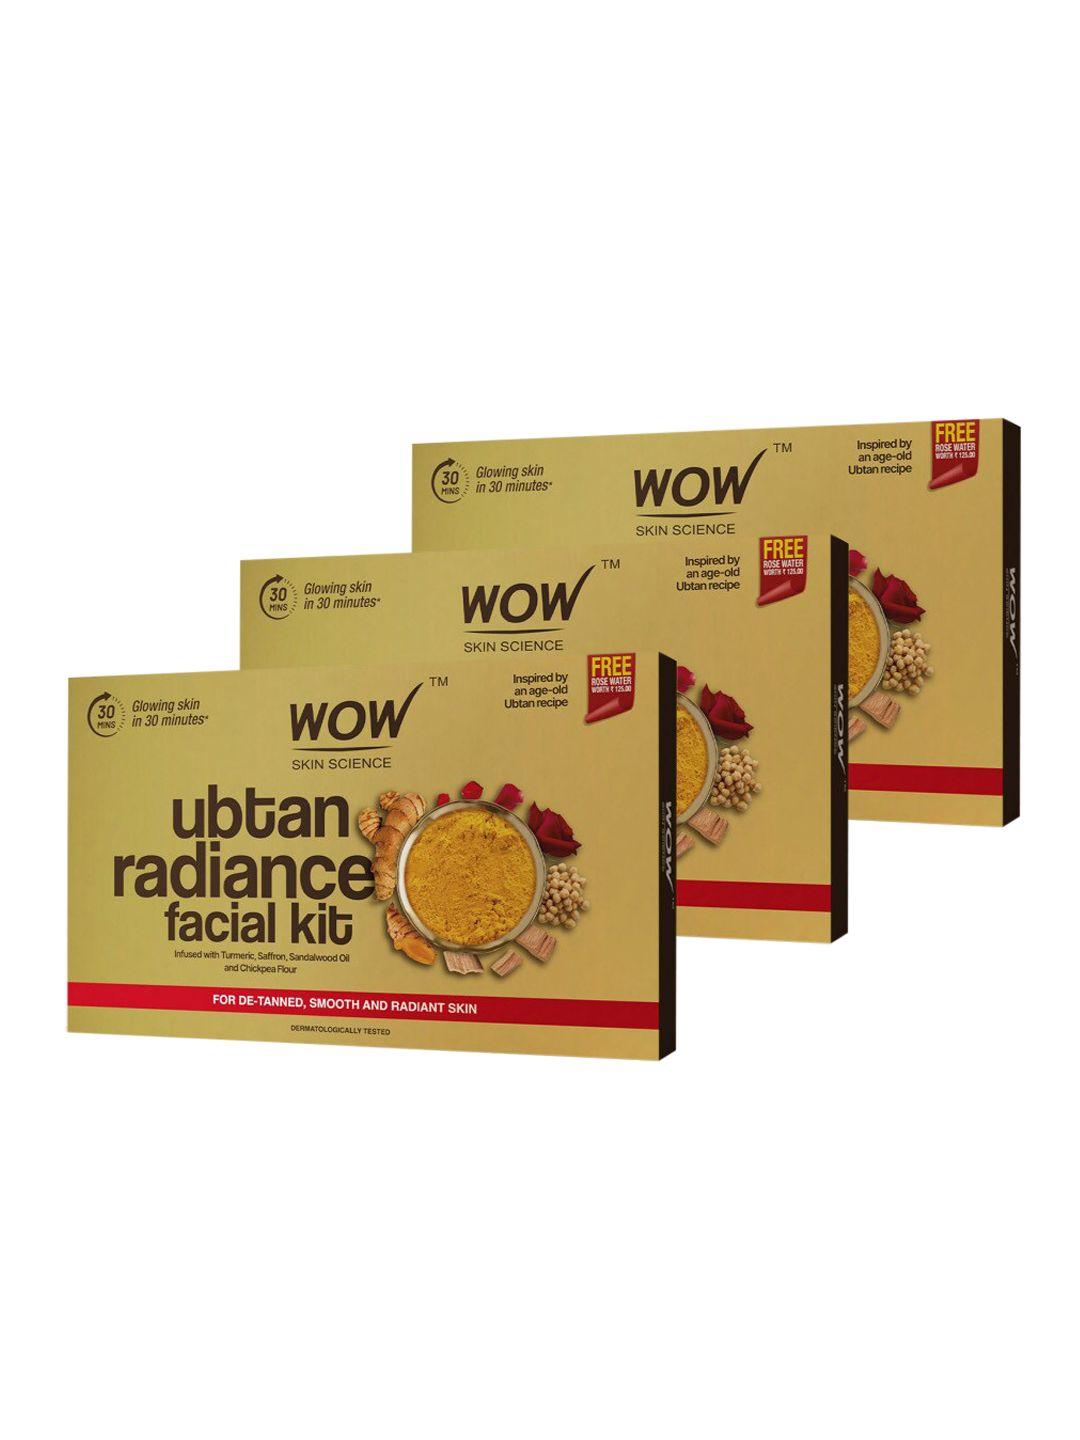 wow skin science pack of 3 ubtan radiance facial kit for glowing skin with free rose water